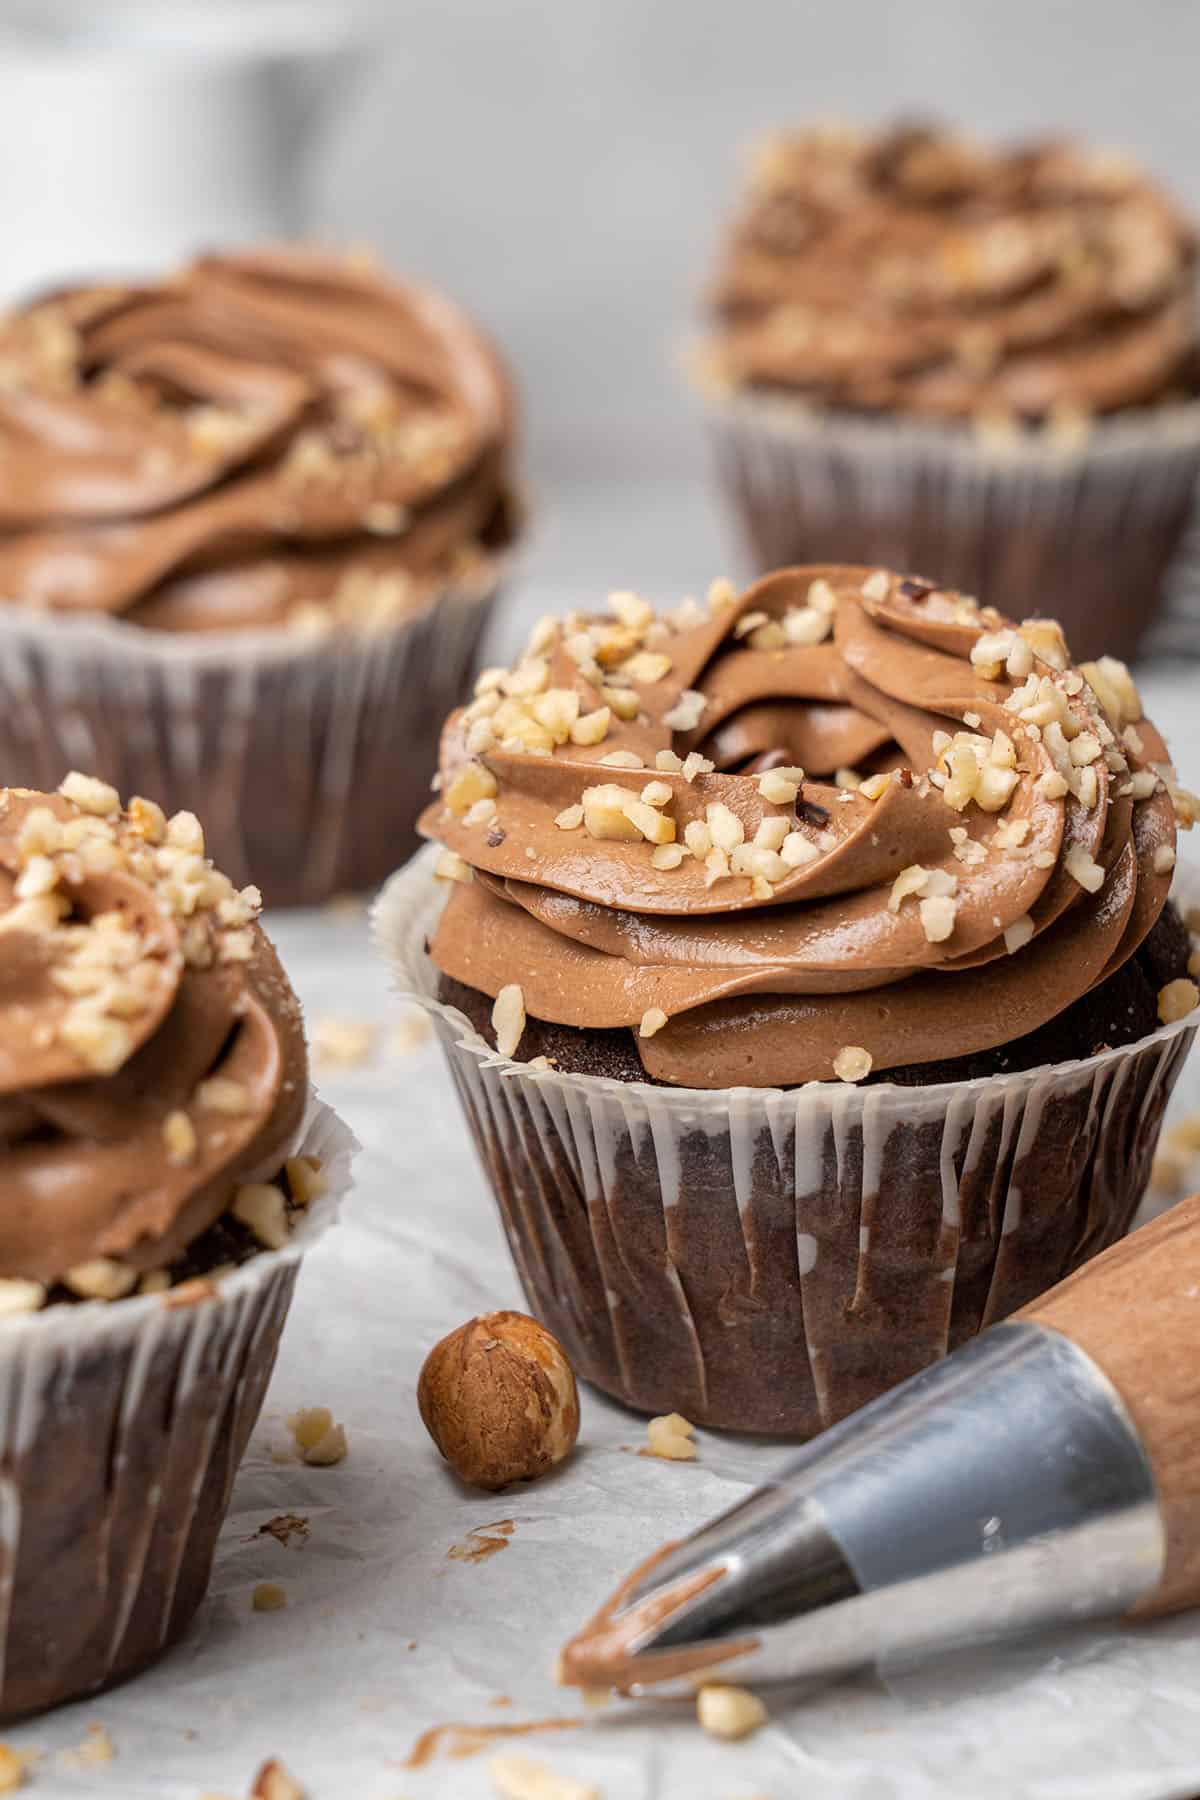 Nutella cupcakes on a baking paper.